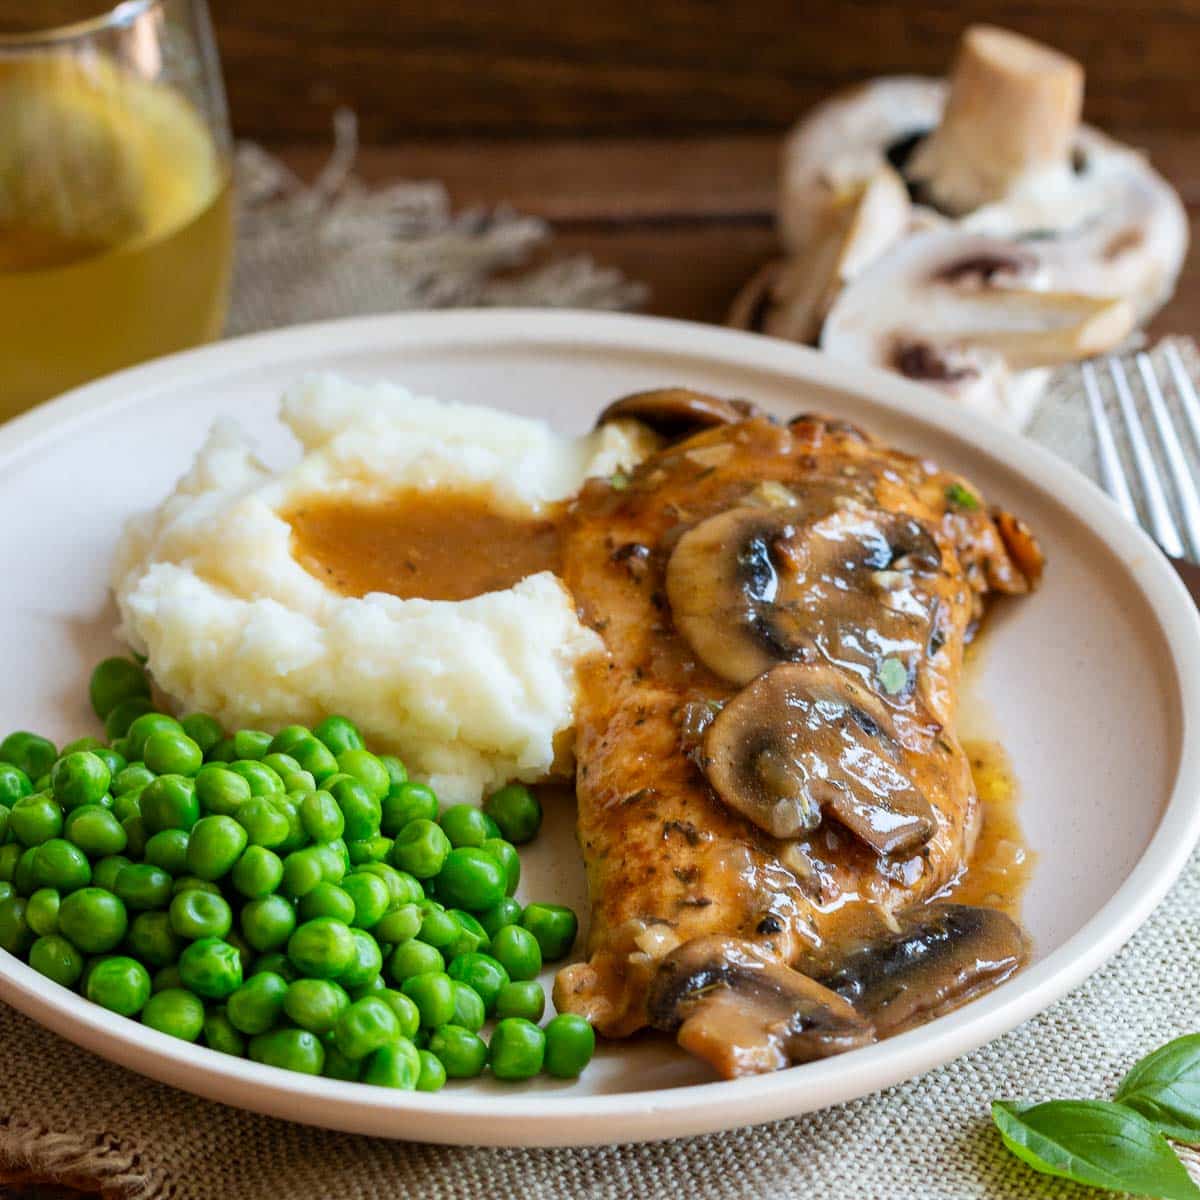 Served up mashed potatoes with the mushroom brandy sauce and peas.